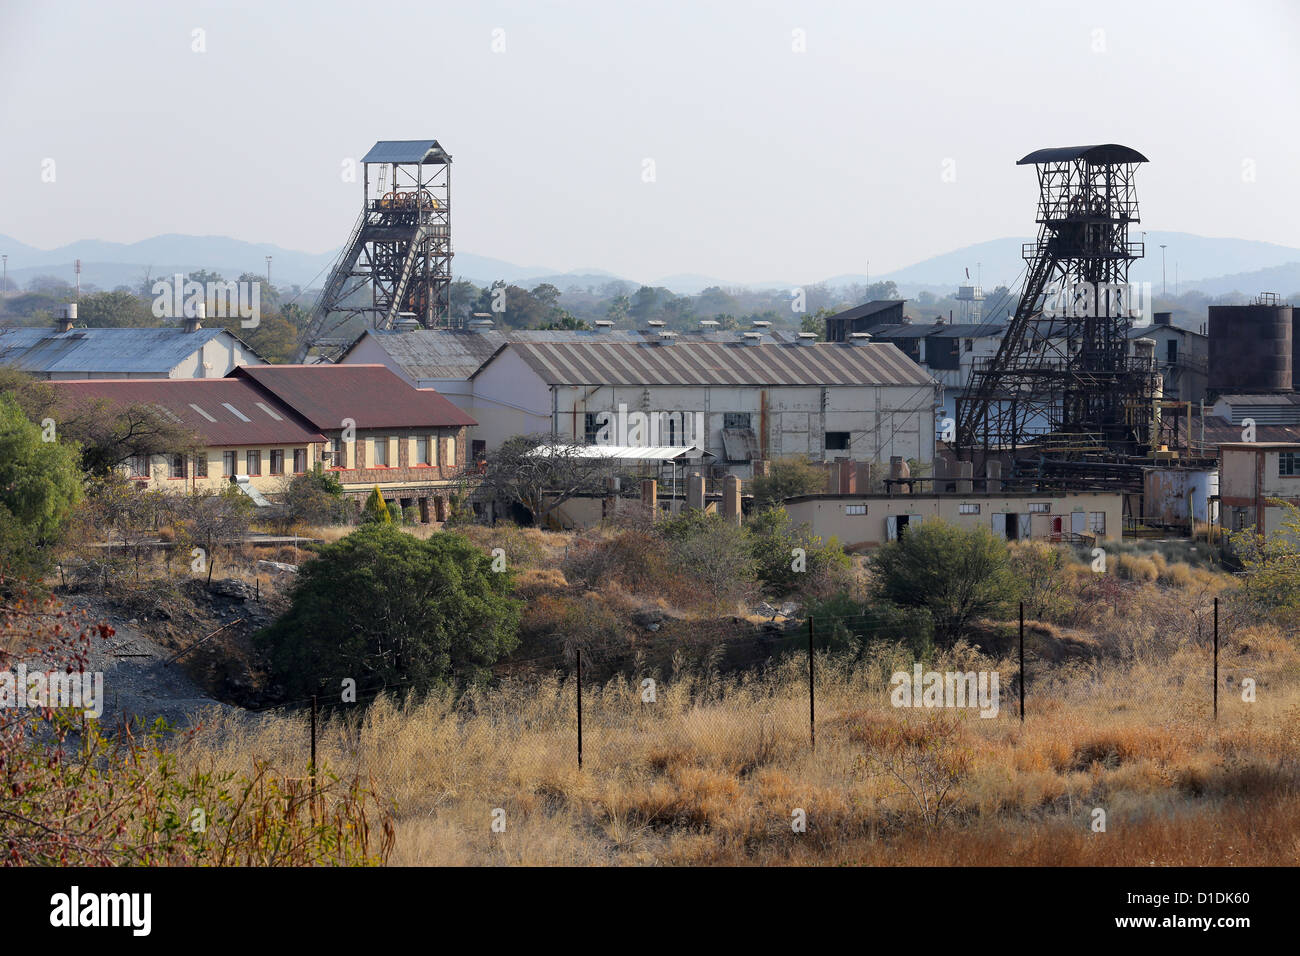 Shaft towers in the former copper mining town of Tsumeb, Namibia, Africa Stock Photo